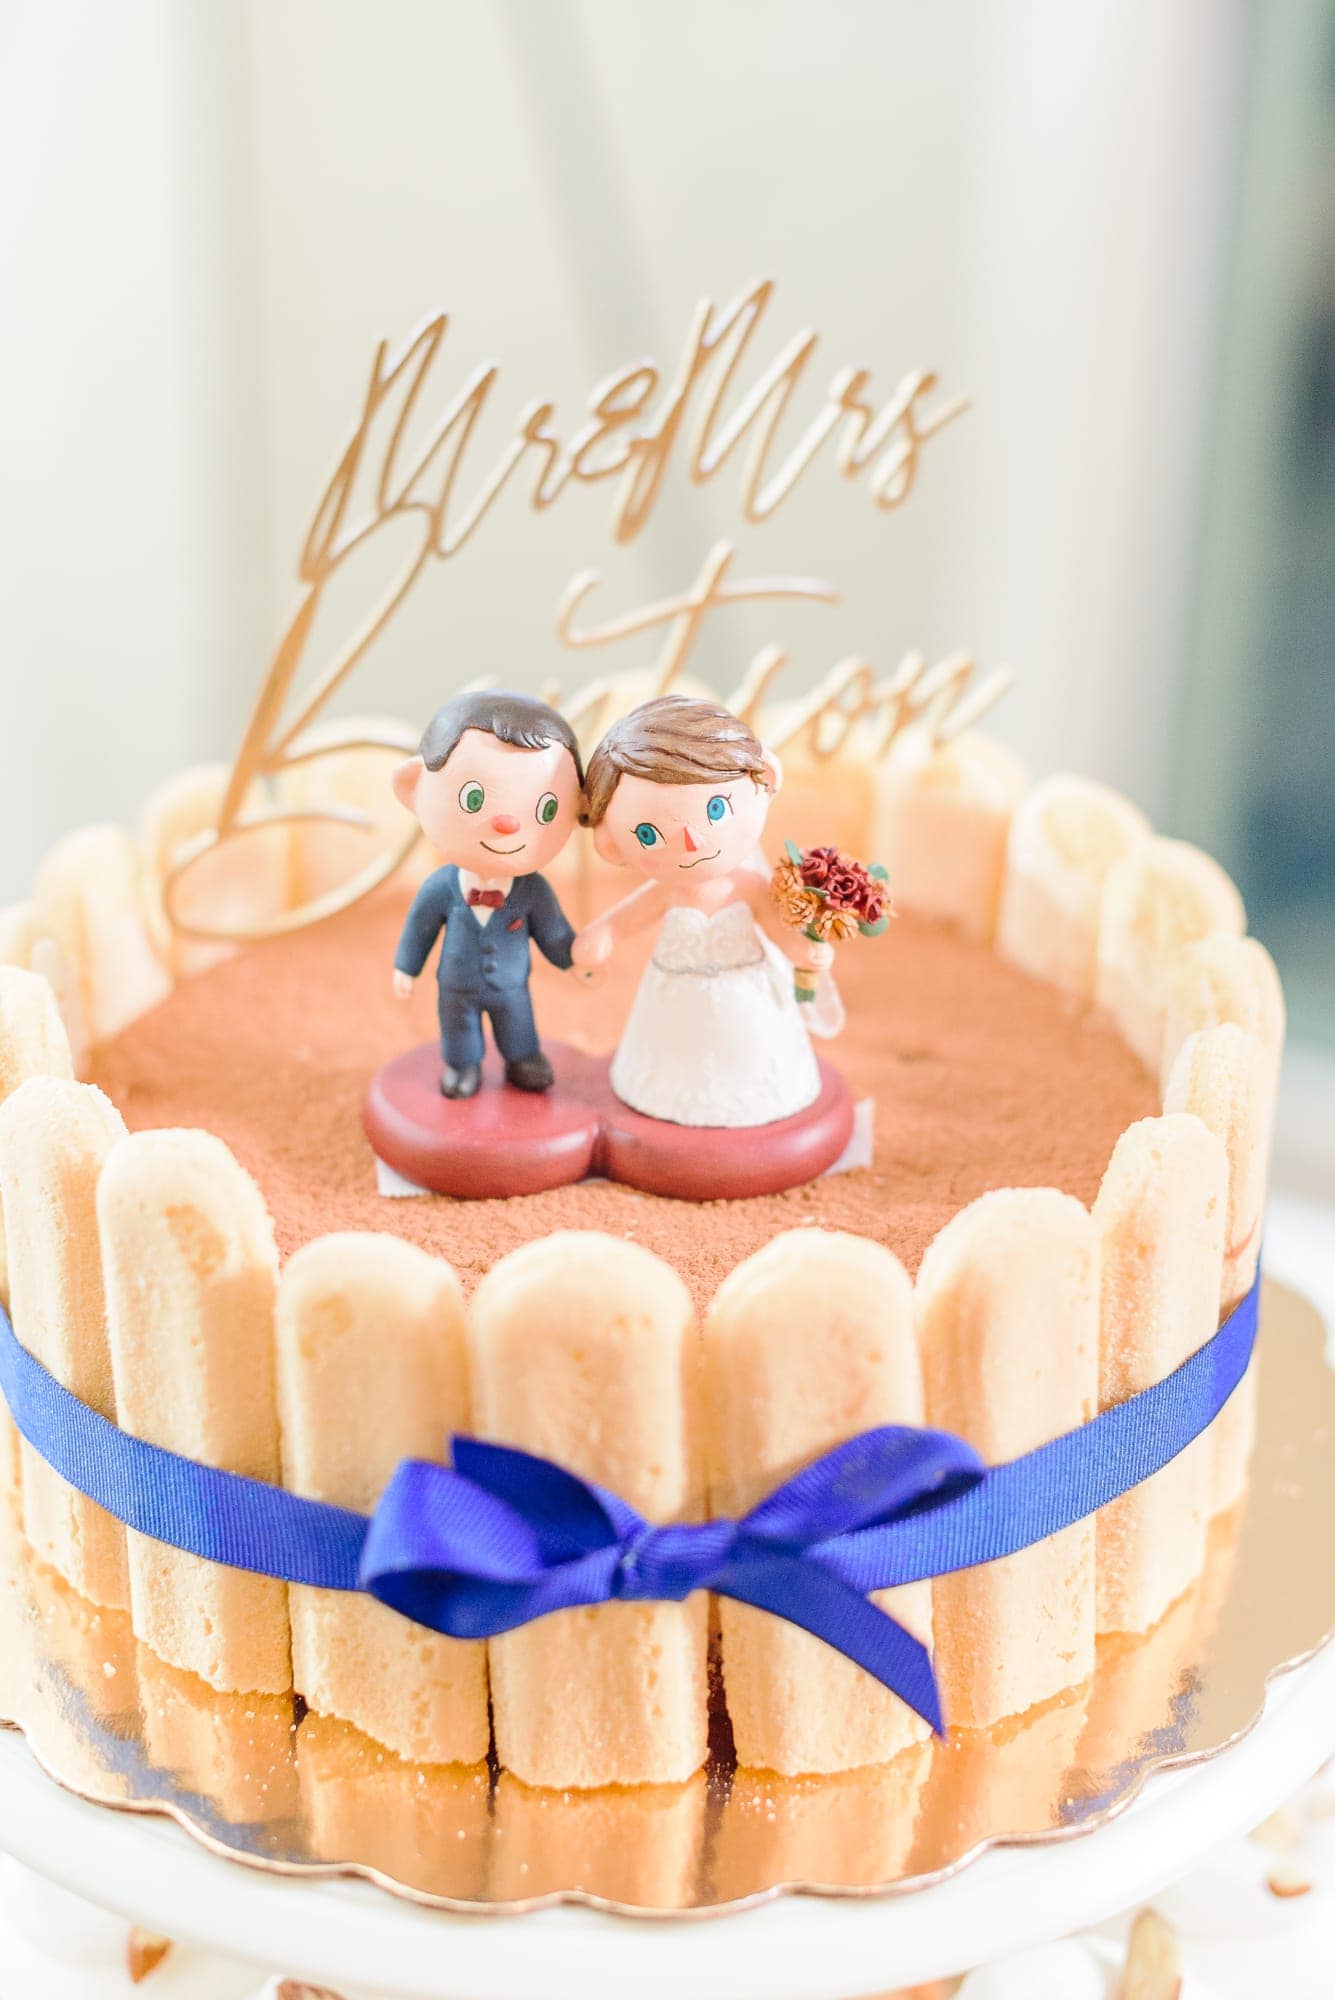 This wedding at the Charles Mack Citizen Center had a custom cake topper made to look like their animal crossing characters.